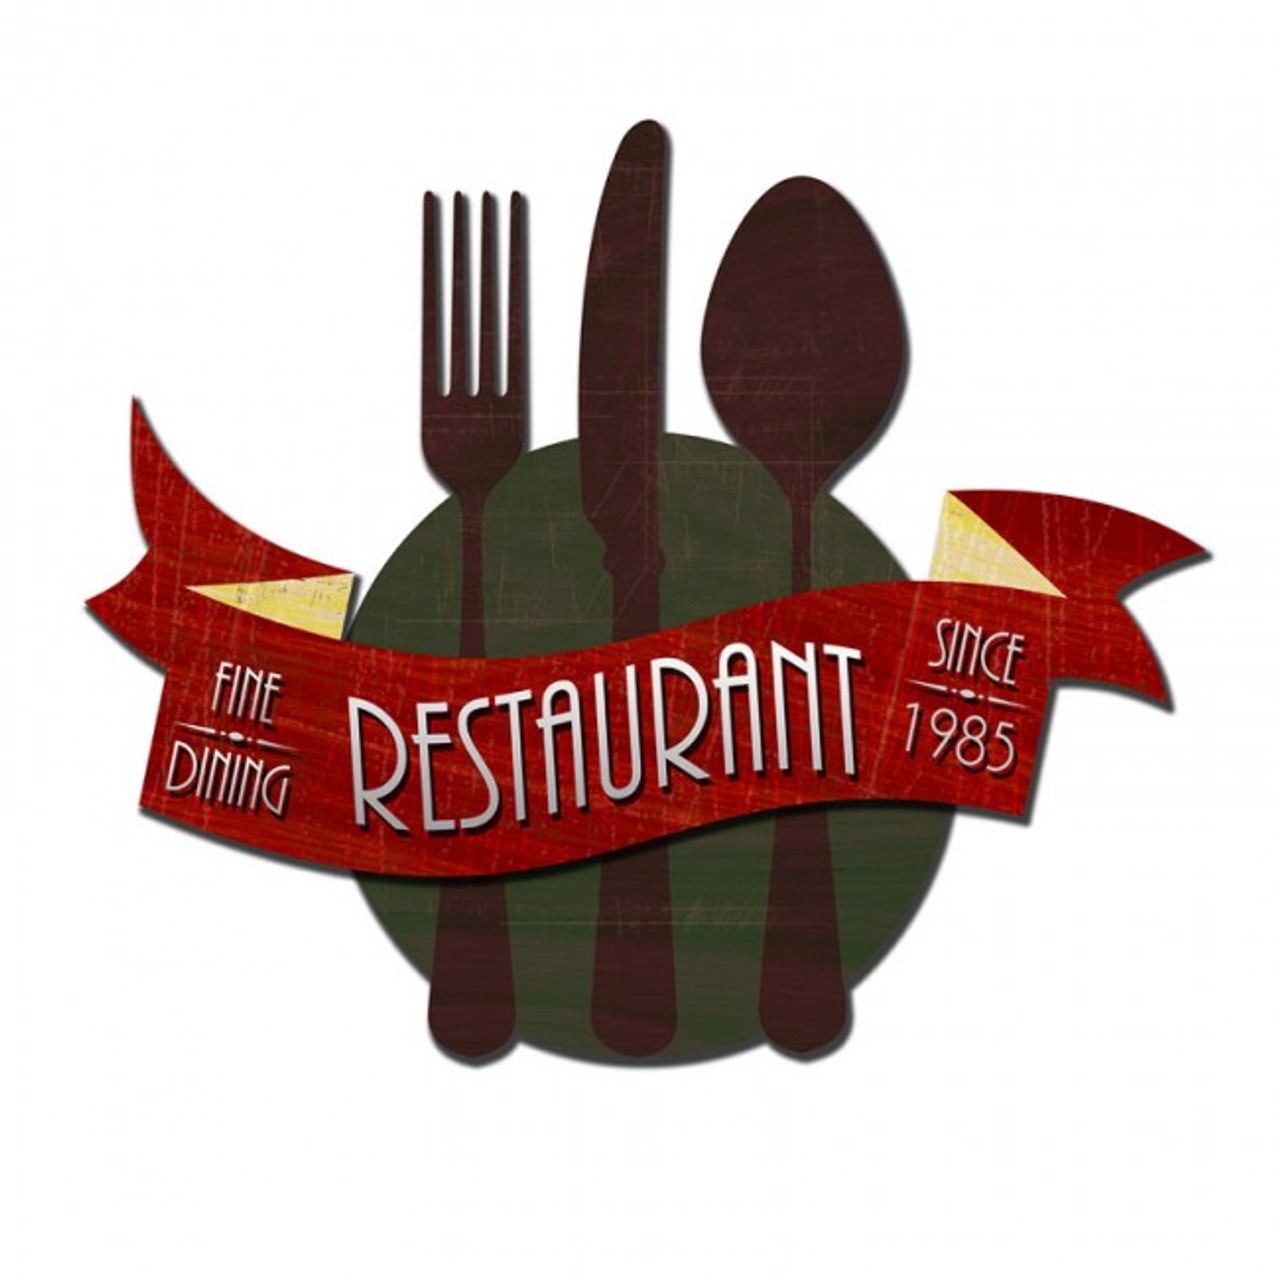 3-D FINE RESTAURANT Metal Sign 24 x 20 Inches